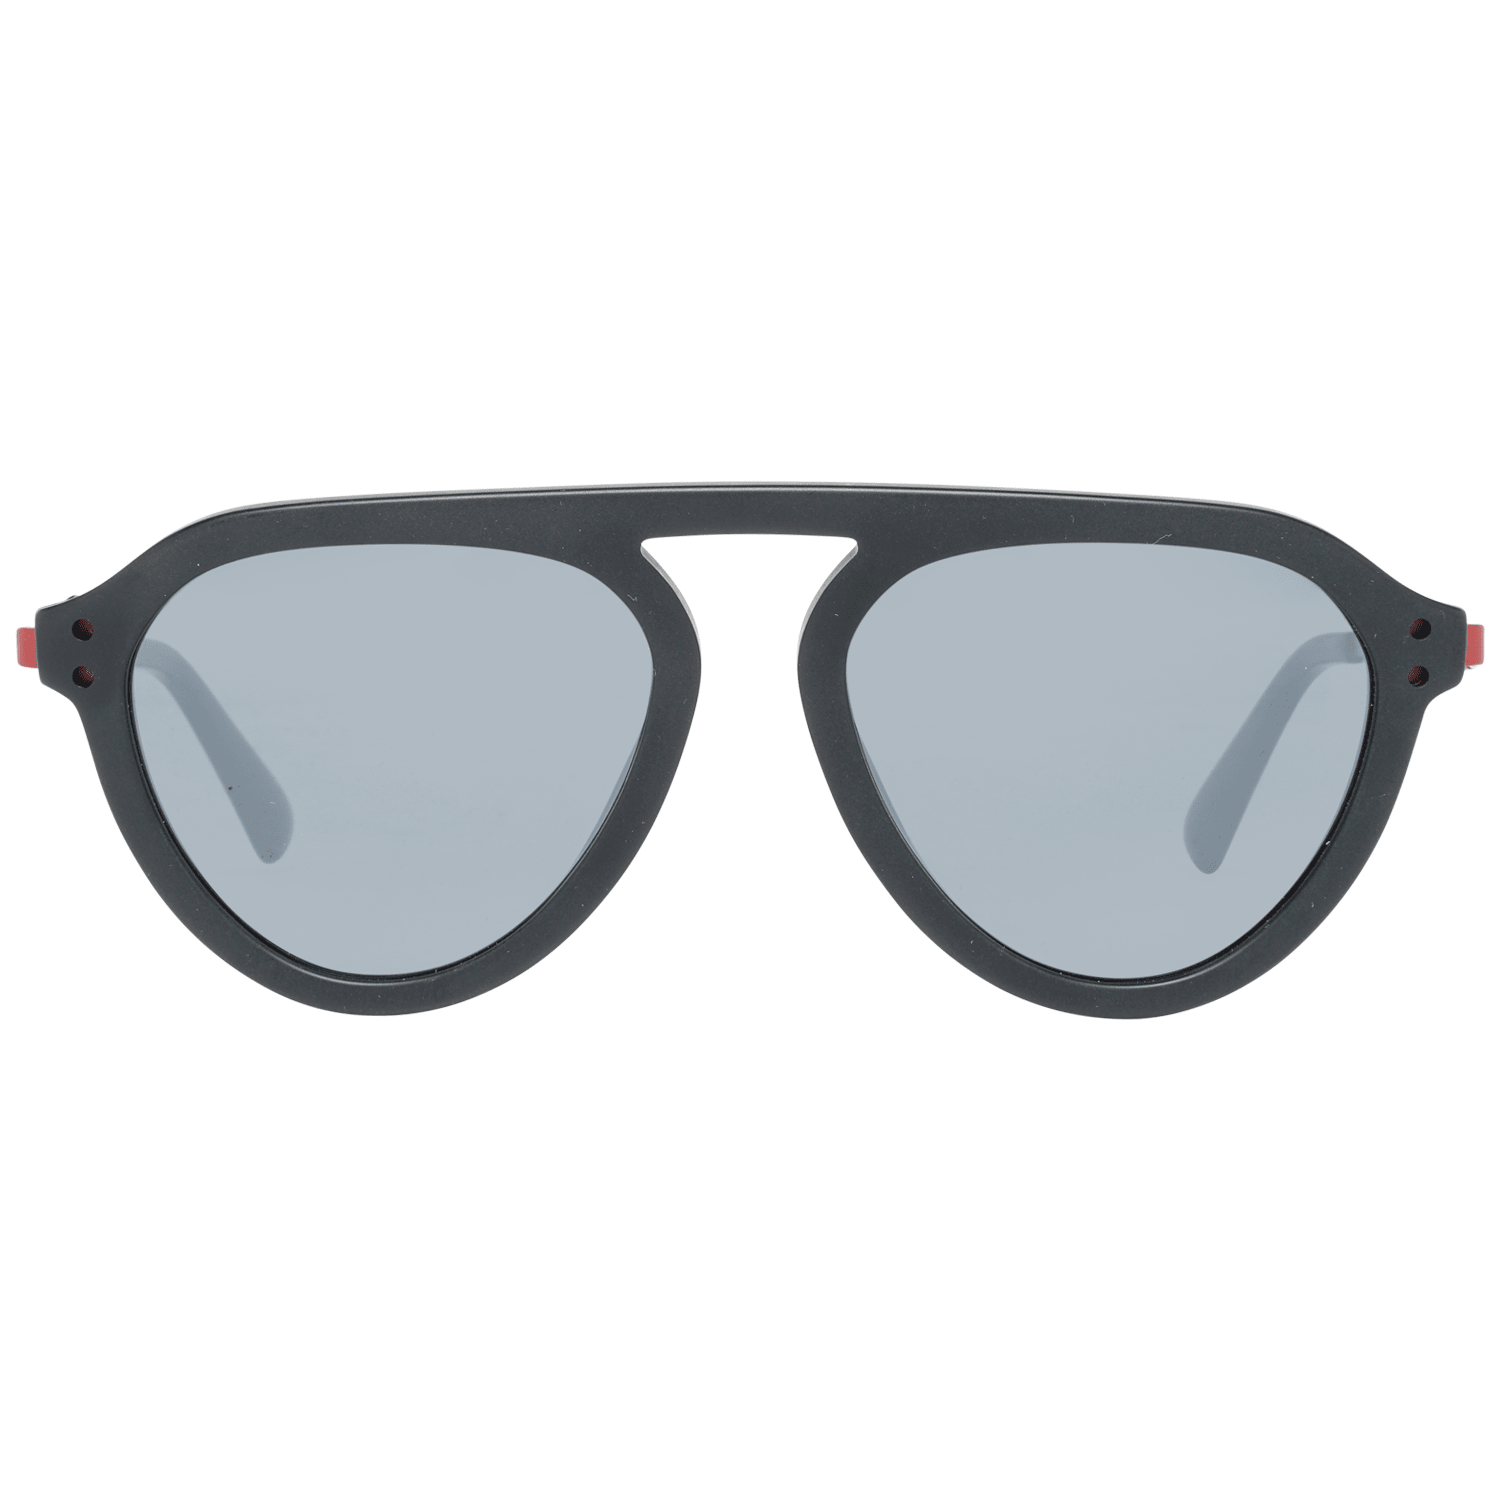 Diesel DL0277 02C Black Sunglasses. Lens Width = 53mm. Nose Bridge Width = 17mm. Arm Length = 145mm. Sunglasses, Sunglasses Case, Cleaning Cloth and Care Instrtions all Included. 100% Protection Against UVA & UVB Sunlight and Conform to British Standard EN 1836:2005